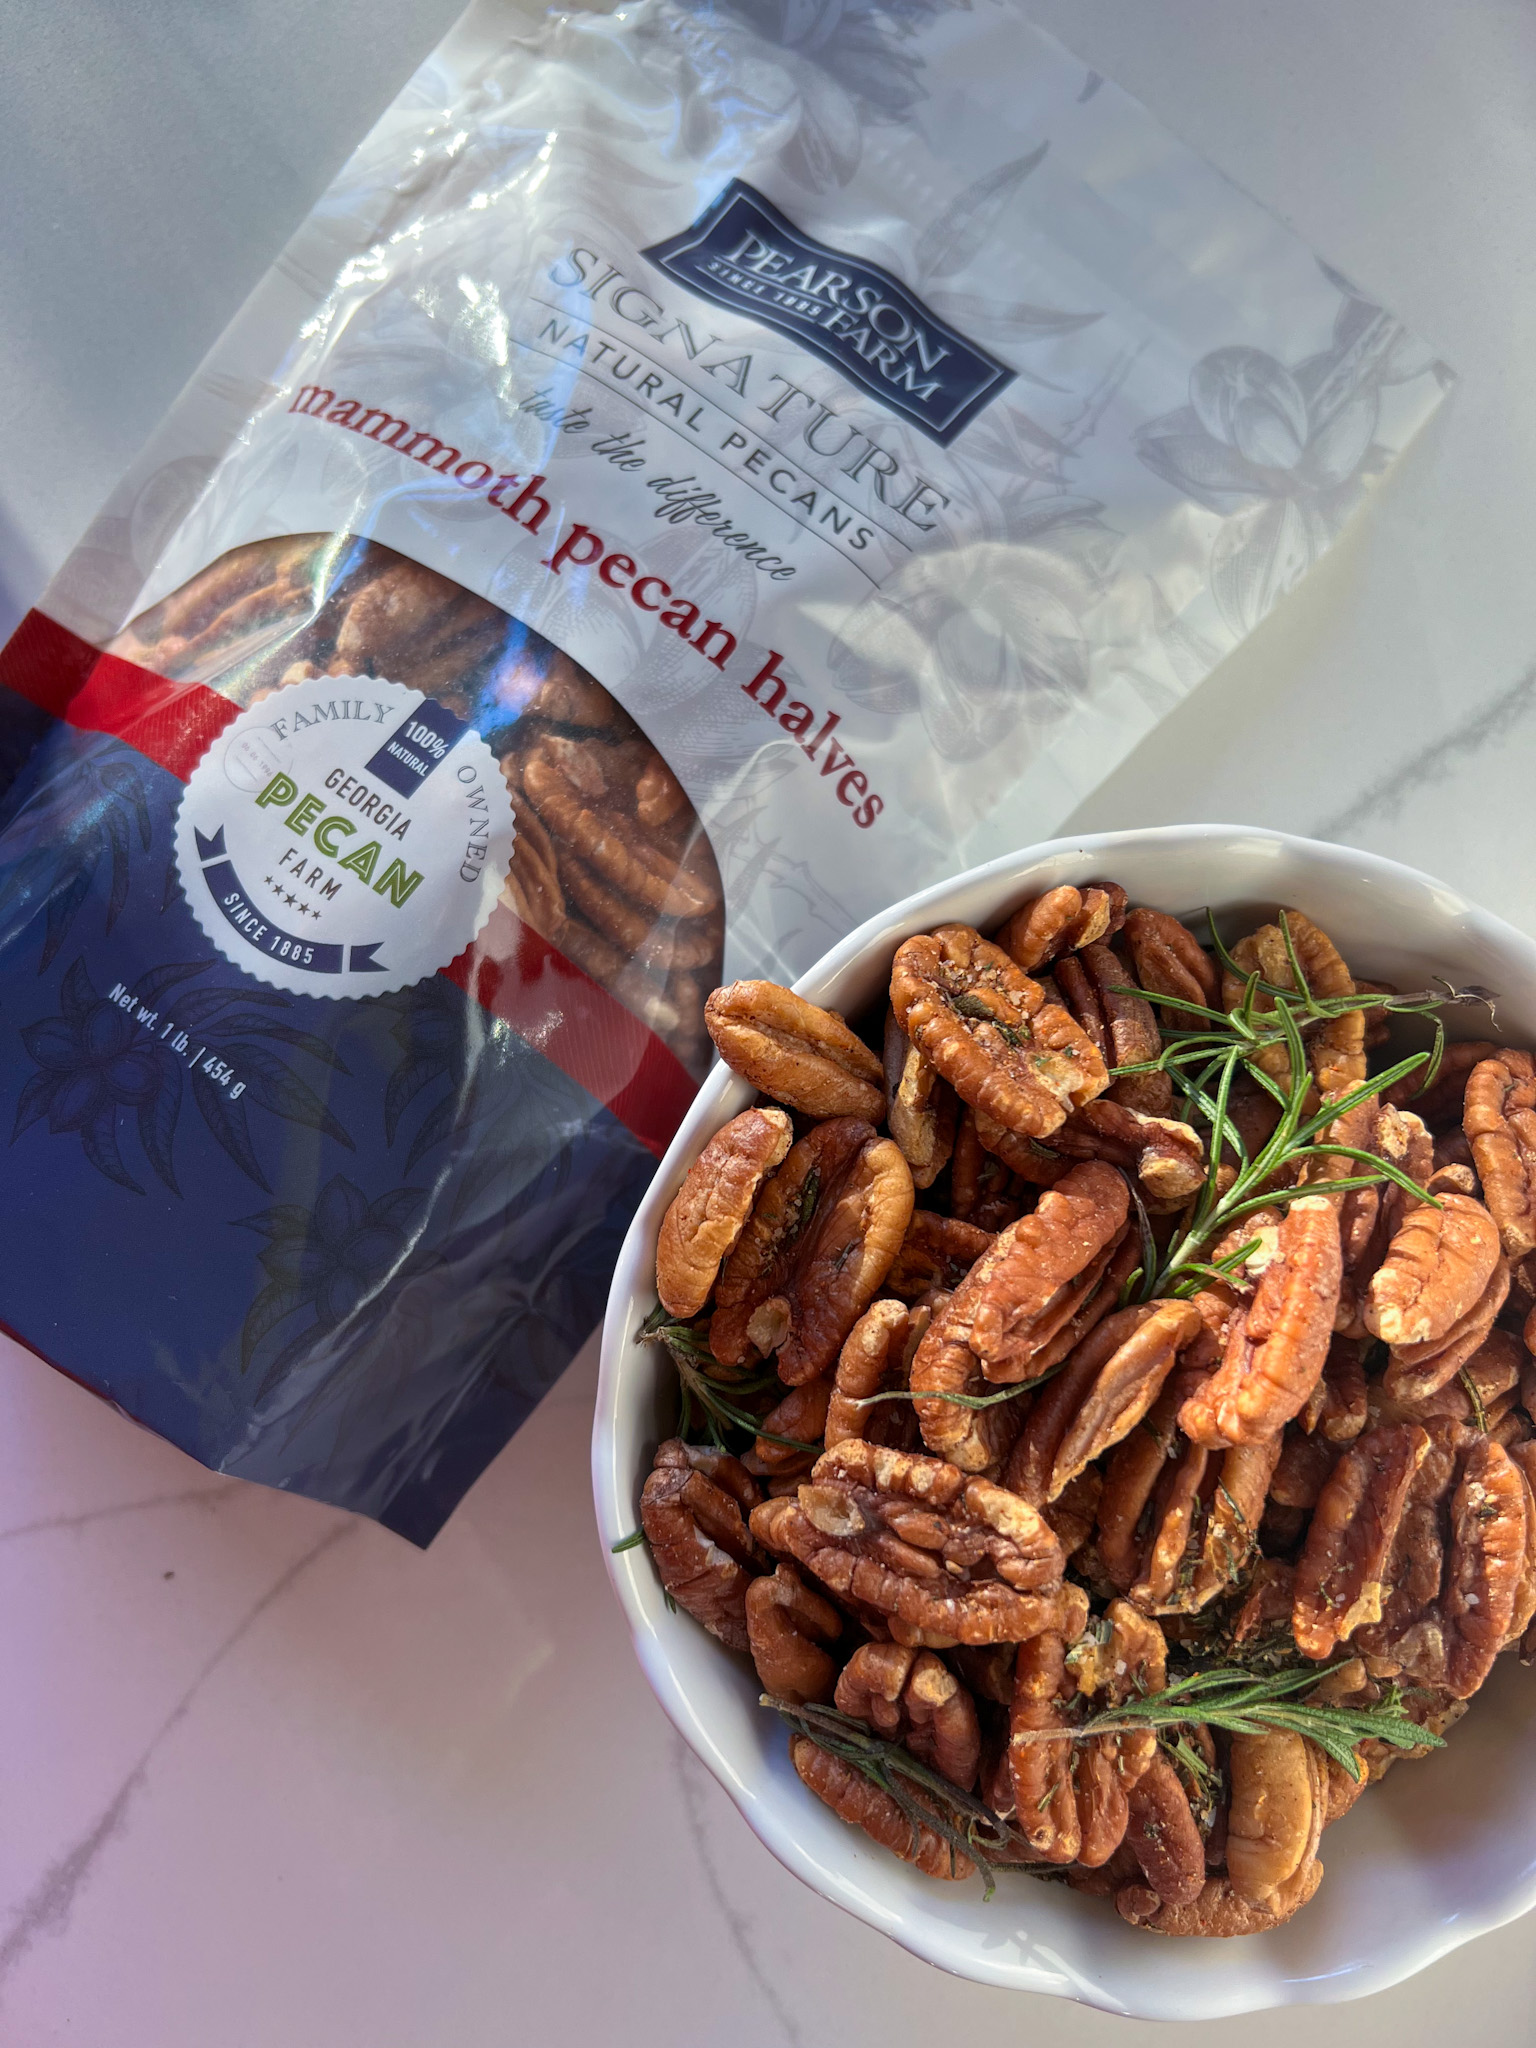 pearson farm mammoth pecans in a bag and a bowl of easy salted roasted pecans with rosemary